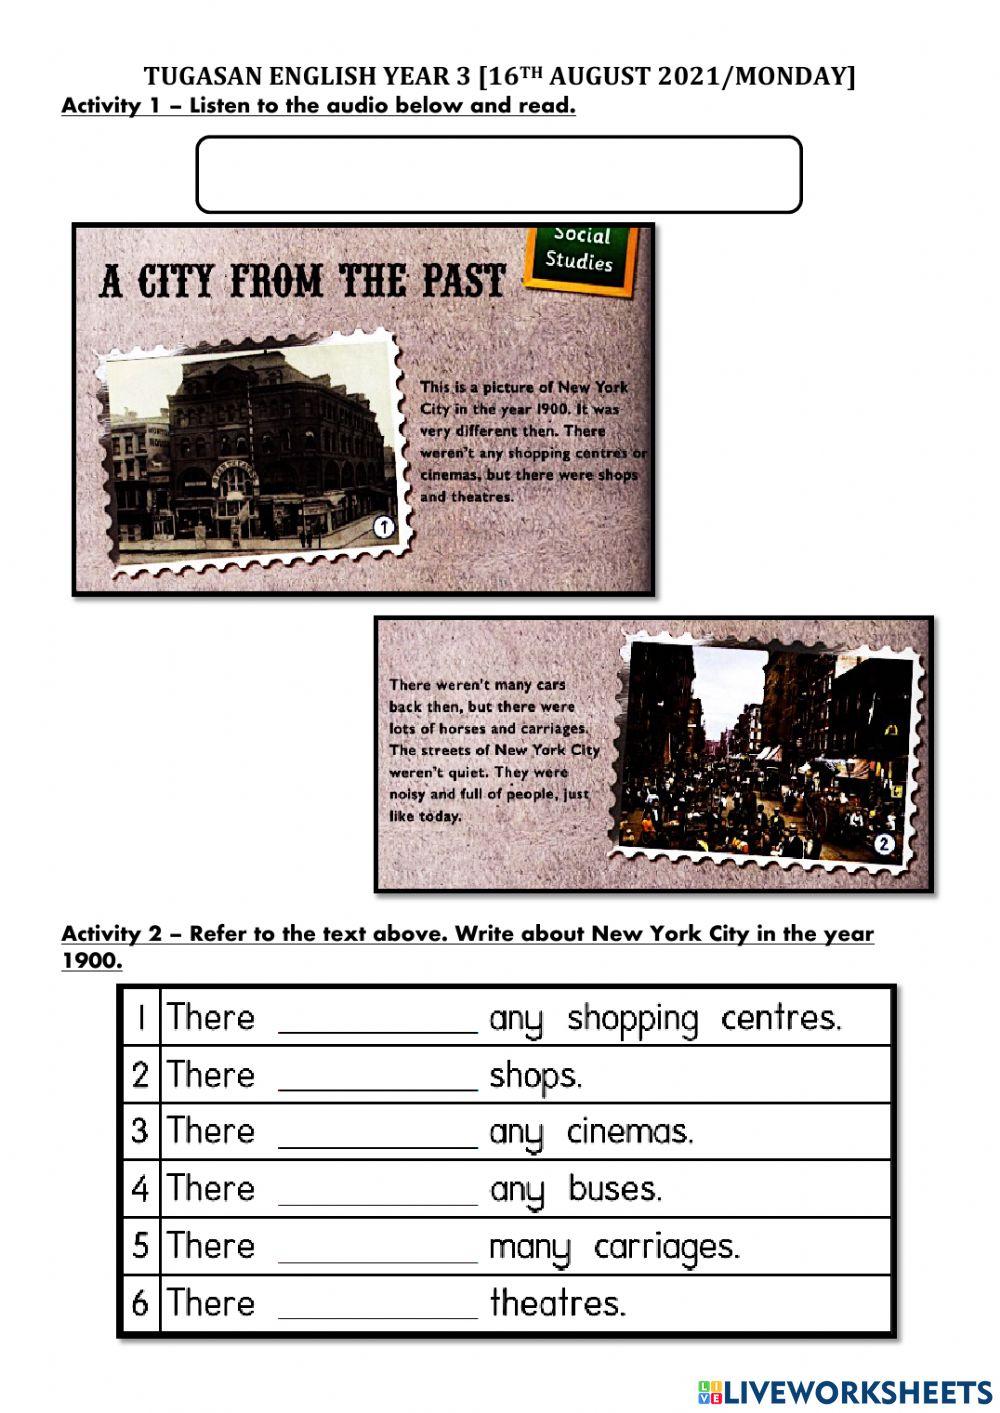 Get Smart Plus 3: Module 8 - A city from the past (Activity 2)